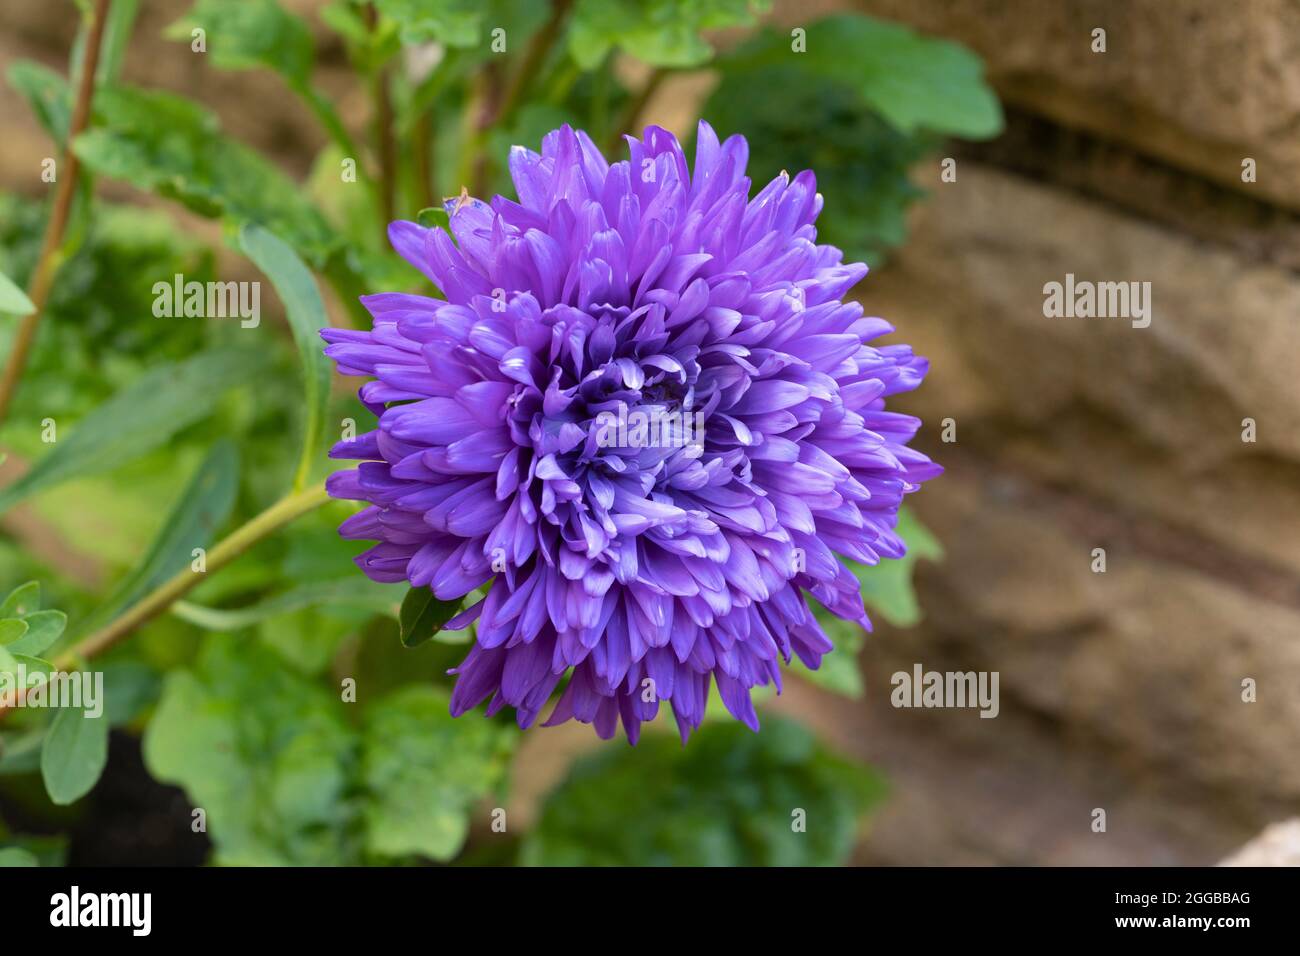 A lilac / purple coloured China Aster (Callistephus chinensis) growing in an English garden in Worcestershire in late August, UK Stock Photo